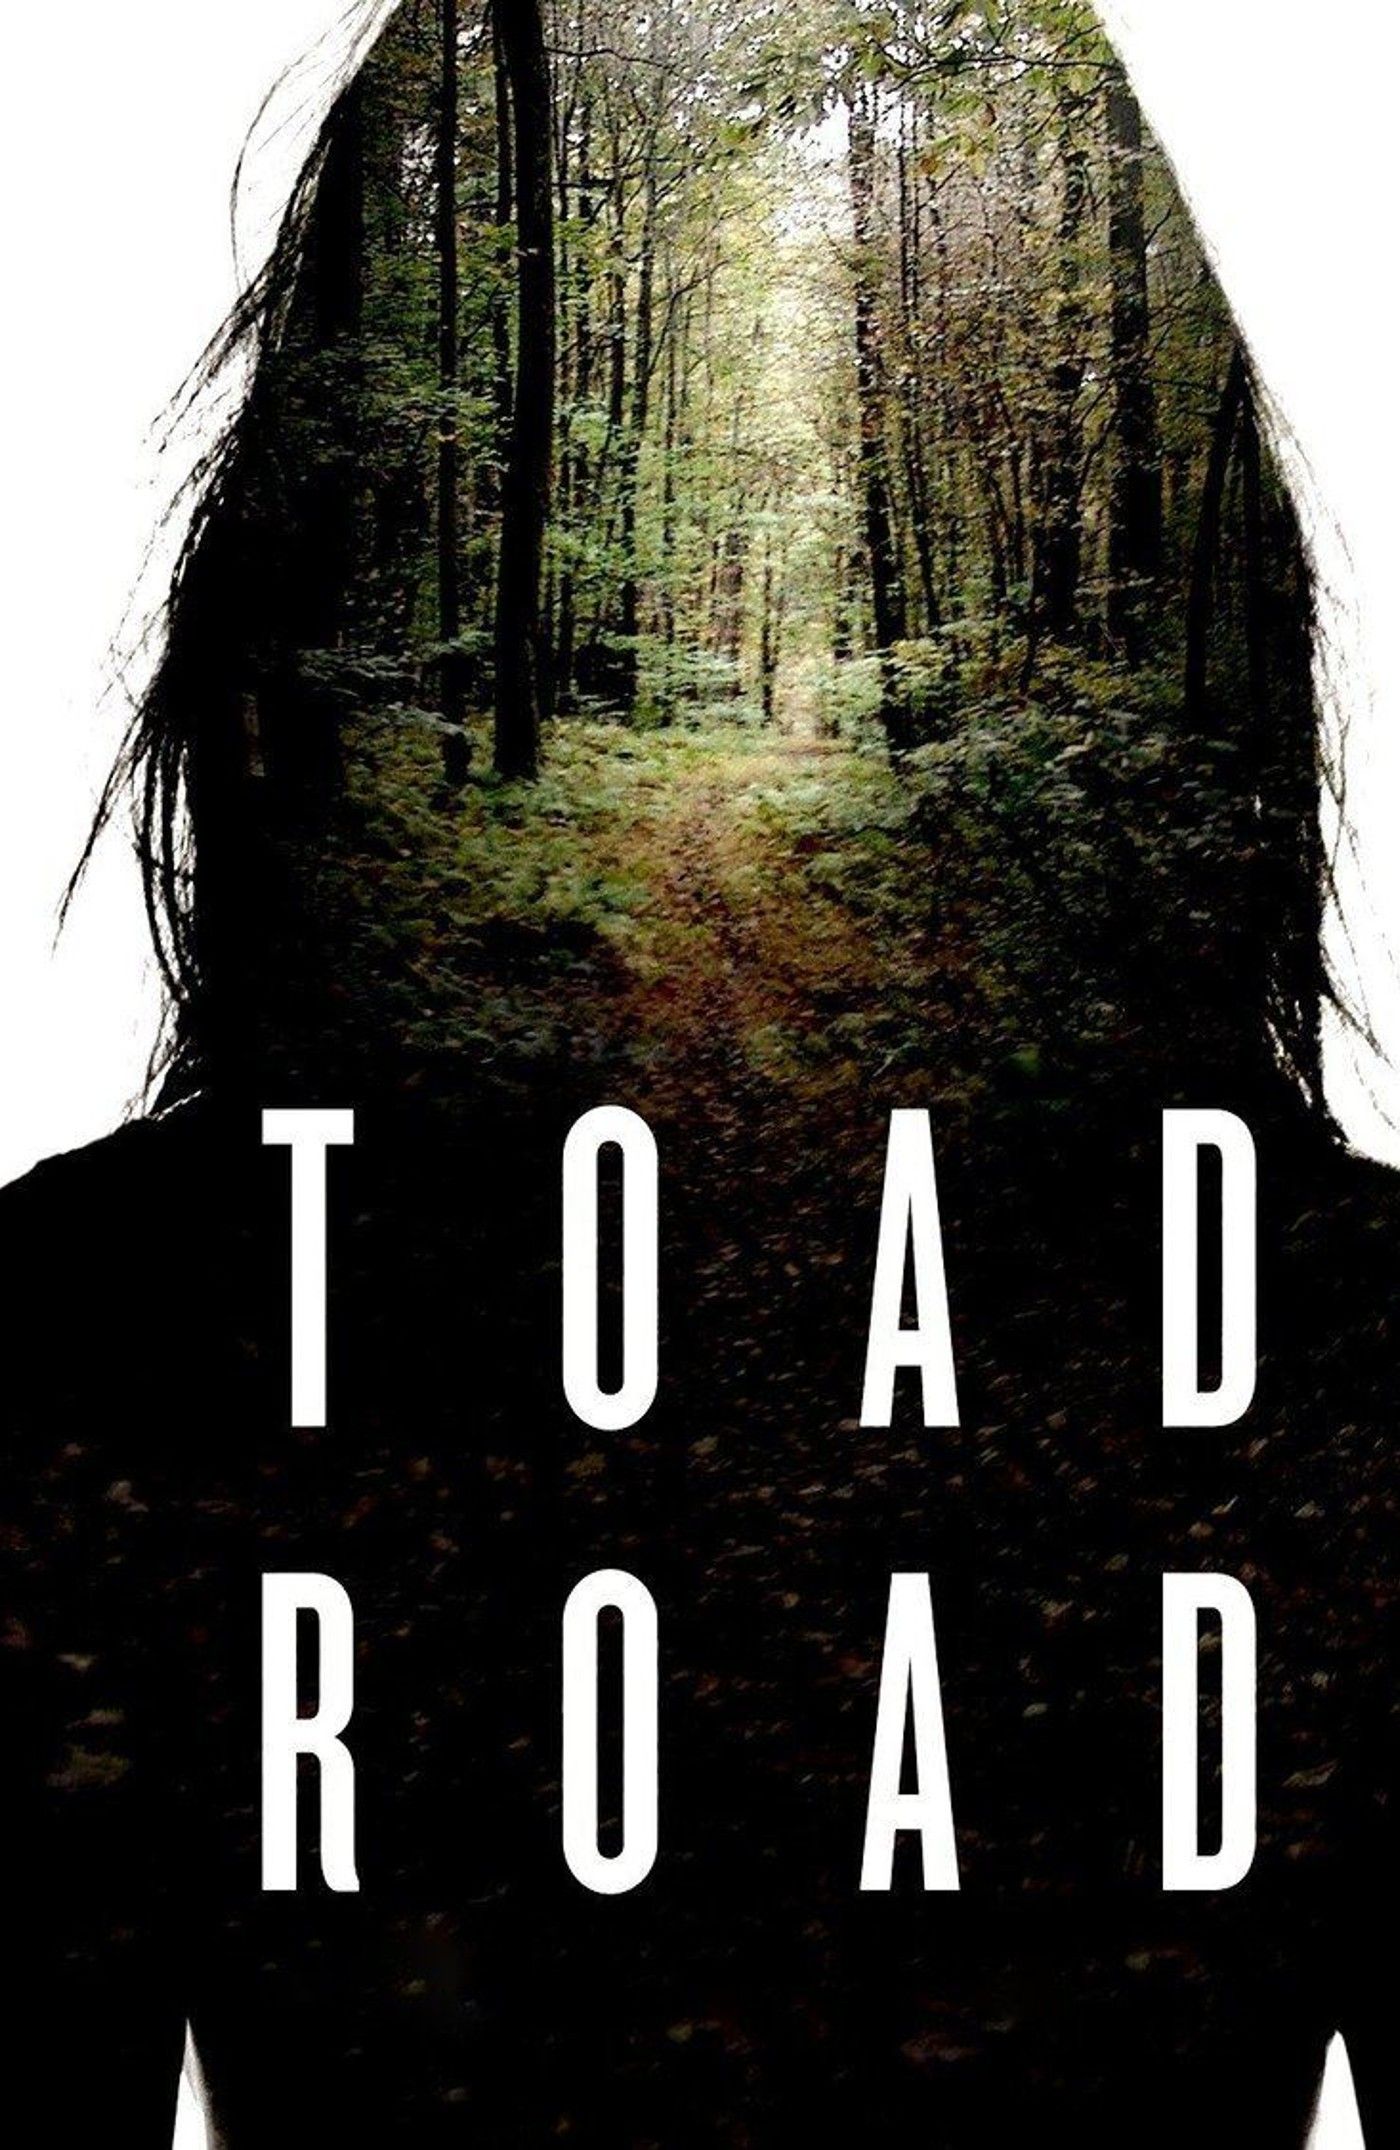 Toad Road film poster from SpectreVision